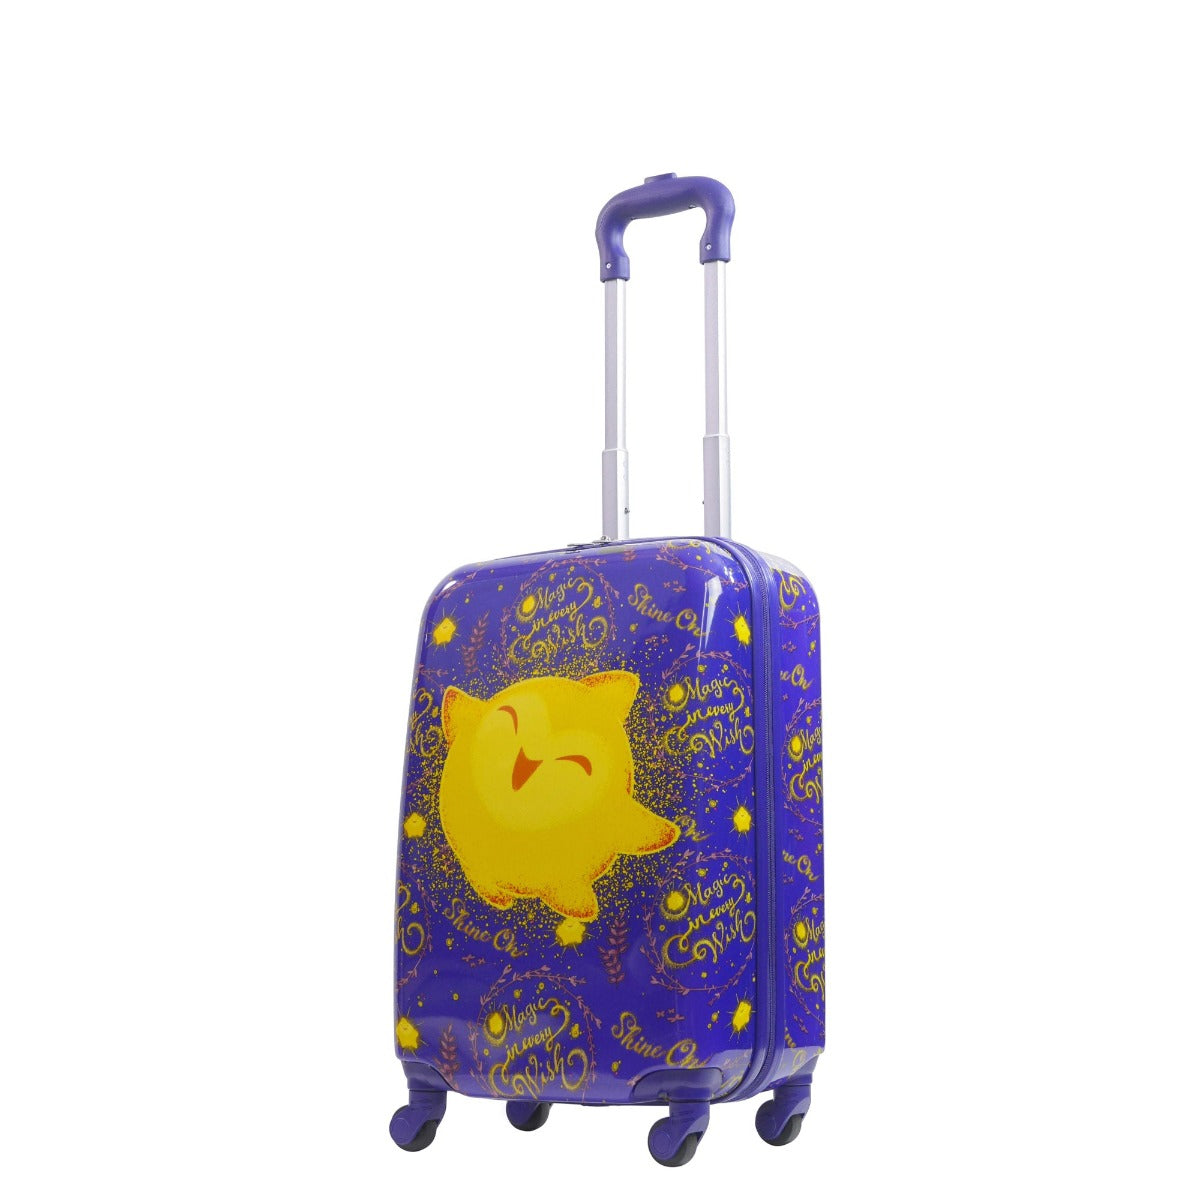 Disney Ful wish star 21 inch hardside spinner suitcase - best kids carry on luggage for travel